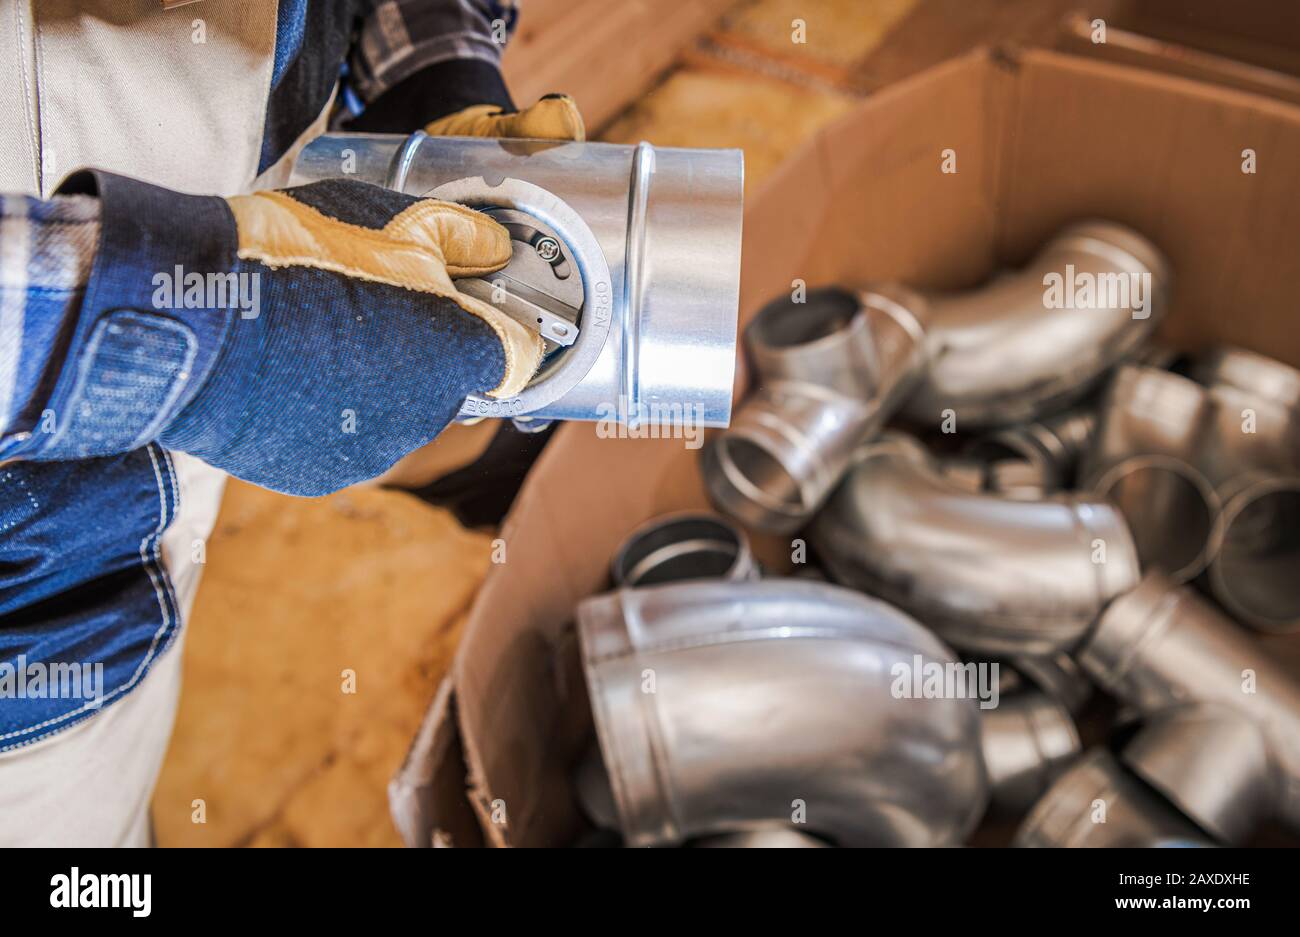 Air Vent Pipeline System Elements. Technician with Air Valve in His Hands. Ventilation Contractor. Stock Photo